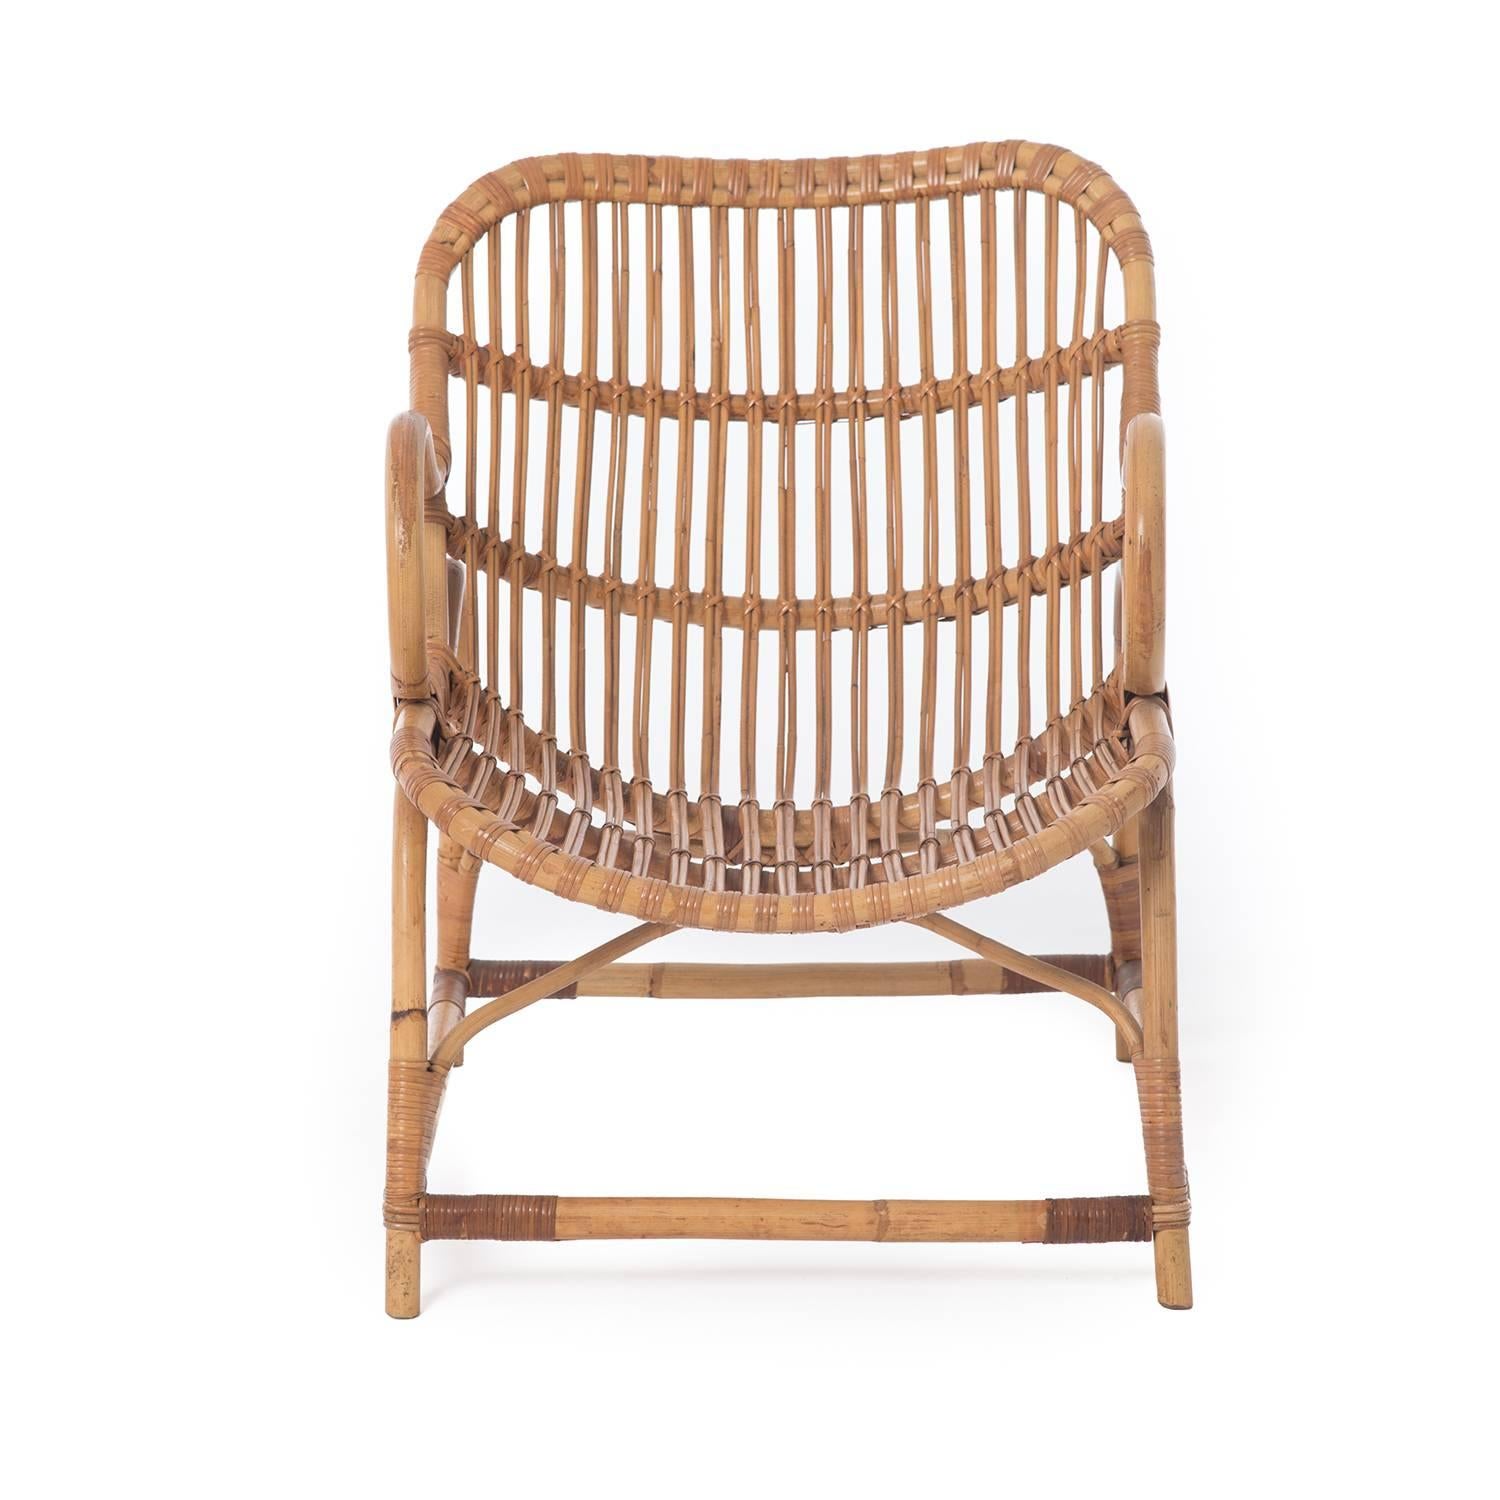 Flemming Lassen wicker chair - sheepskin not included.

Professional, skilled furniture restoration is an integral part of what we do every day. Our goal is to provide beautiful, functional furniture that honors its illustrious past. Our